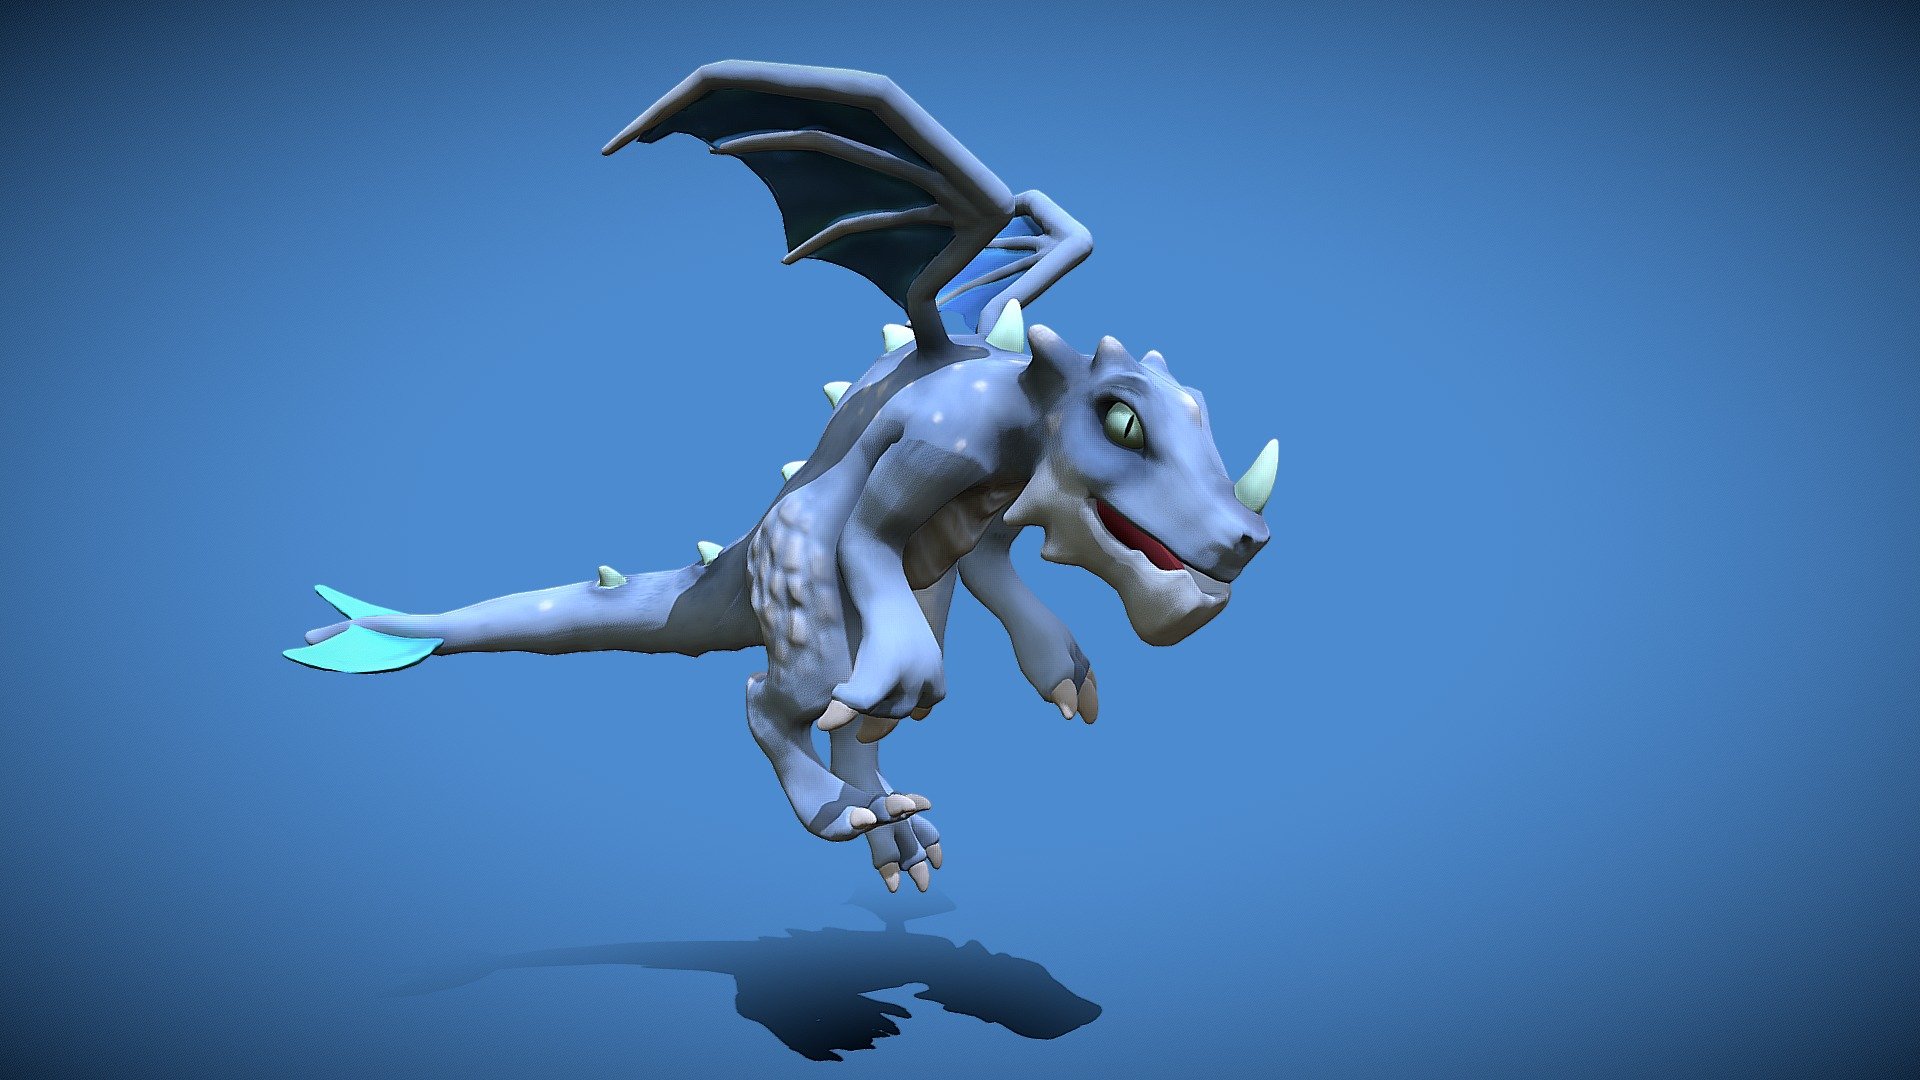 Cartoon young dragon

Features

-Model is completly unwrapped
-Layered scene (RIgg, mesh, lights, BG, controls)
-Lowpoly model
-Optimal Vray settings 
-Morpher expresions
-No need any plugin to open scene
-All nodes are named clearly
-Clean topology based on quads.
-One mesh
-Hand painted model

File format

-3Ds Max 2015 (Vray 3.0.0)
-3Ds Max 2012 (Vray 3.0.0)
-Obj 2015
-3Ds 2015
-FBX (contains body skeleton and morpher expressions) 3Ds Max

Textures

-Body texture res is 4k
-PNG format

Rigging

-Rigging inside 3Ds Max by Skin modifier, used CAT skeleton
-Handly rigged with vertex weight and painting for better movements
-Scene also include fly animation

Lights and Render setting are included in the 3DS Max scene (V-ray). Just open and render
Scene also include Walk animation, folder FBX format whitch can be used on another 3D software or games engines.

I hope u like it!
For more models just click on my name and browse library.
Cartoon young dragon - frost dragon - Buy Royalty Free 3D model by 3DAnvil 3d model